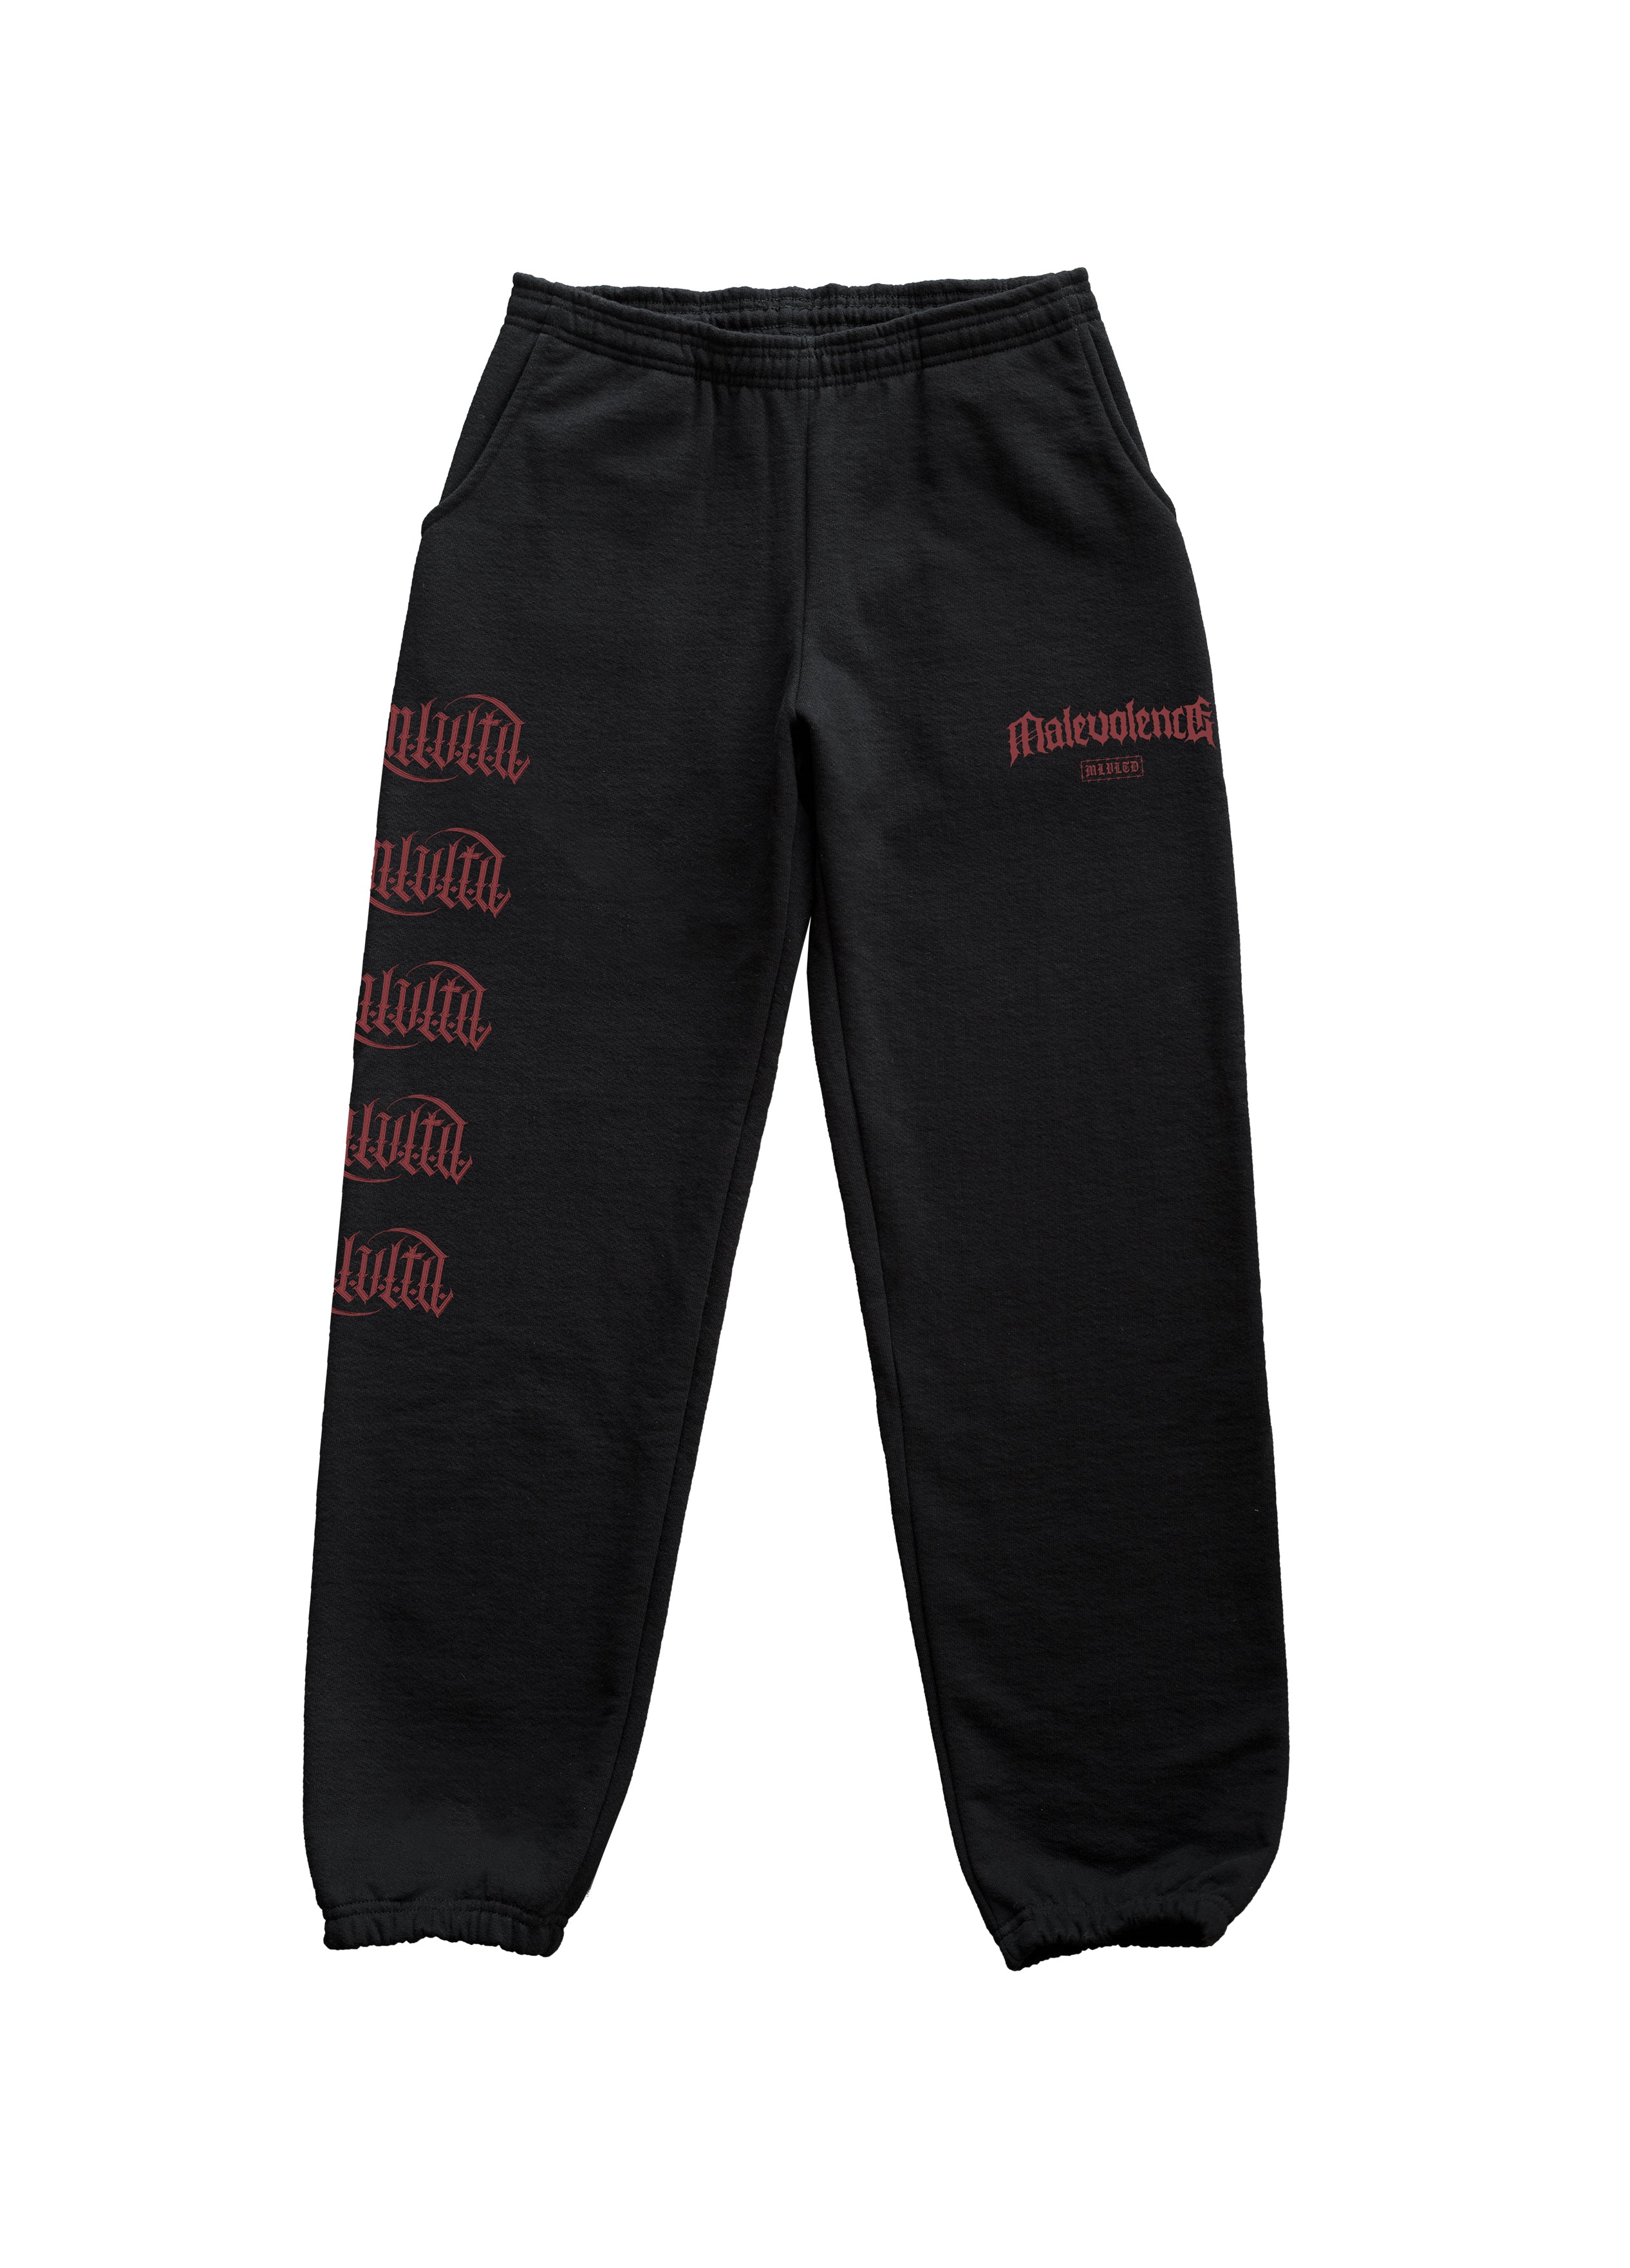 Malevolence - The Aggression Sessions Joggers